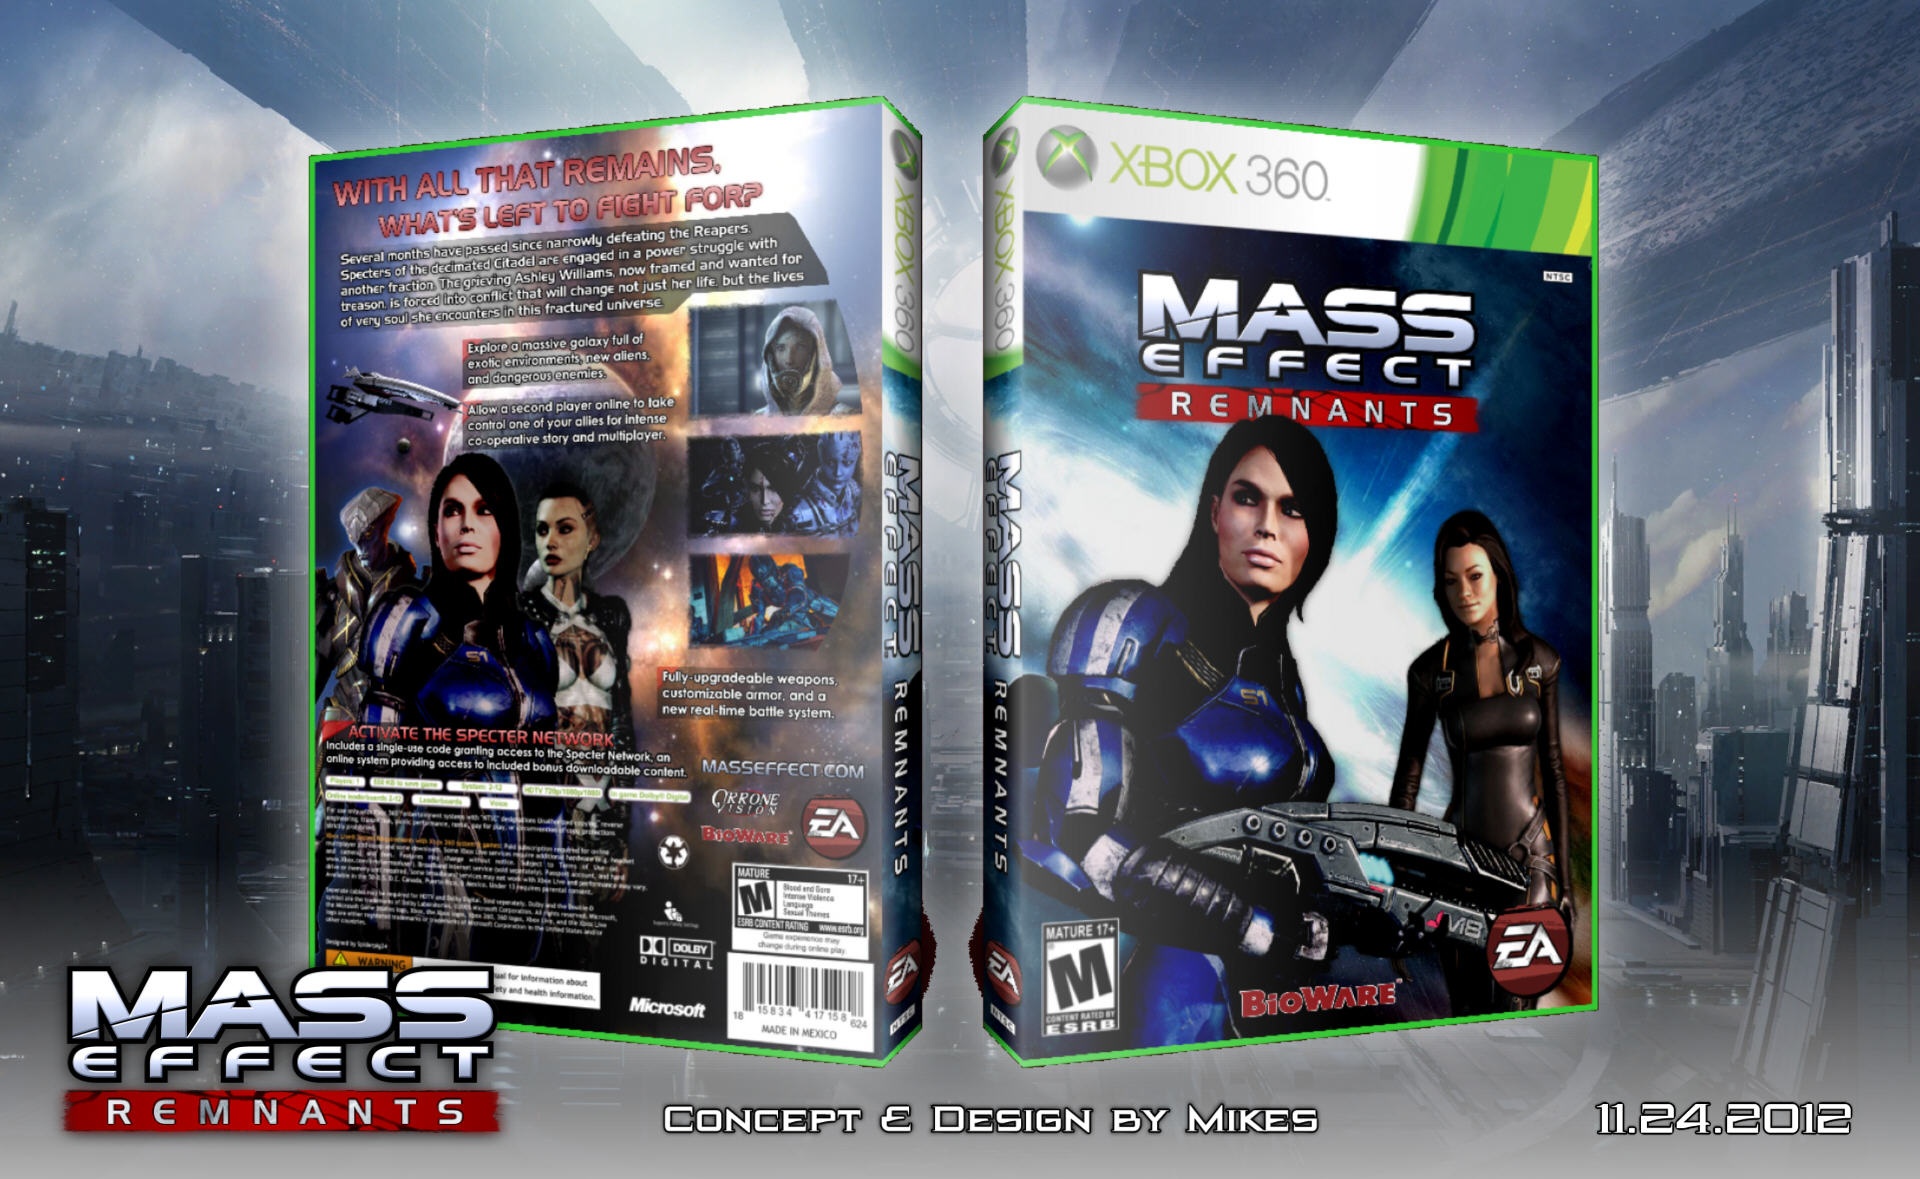 Mass Effect Remnants box cover